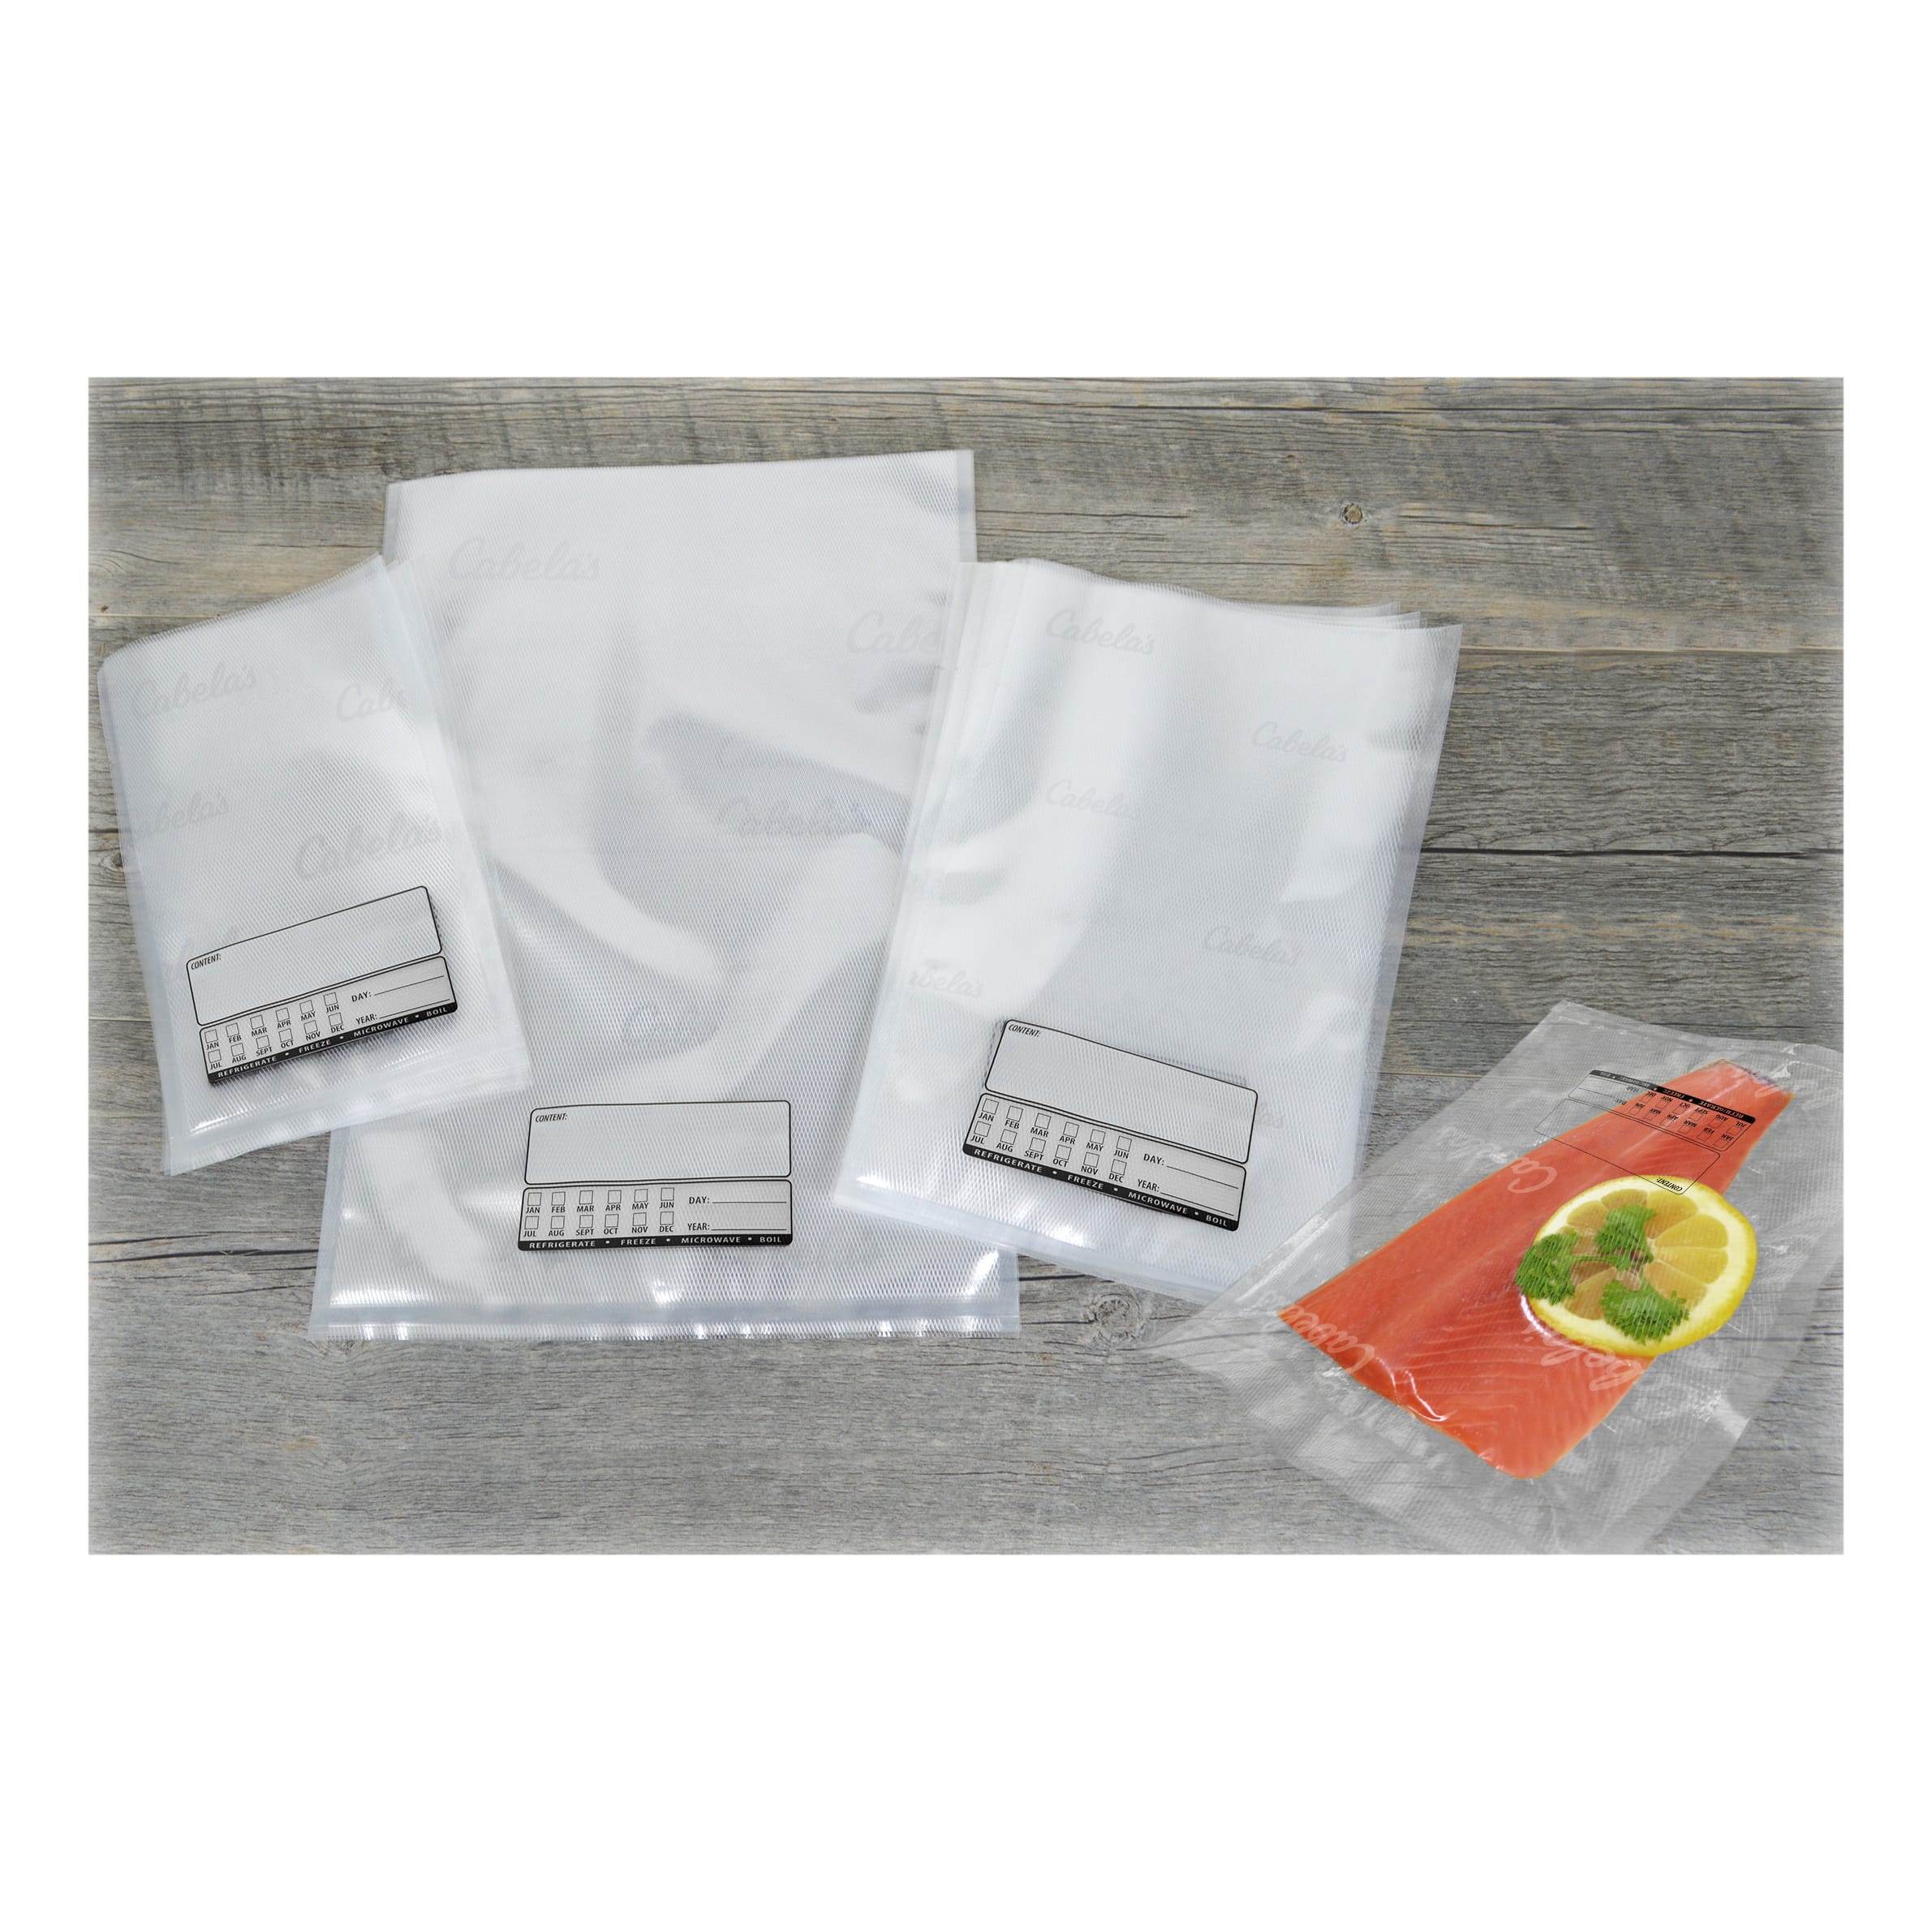 Cabela’s® Vacuum Sealer Replacement Bags - In the Field